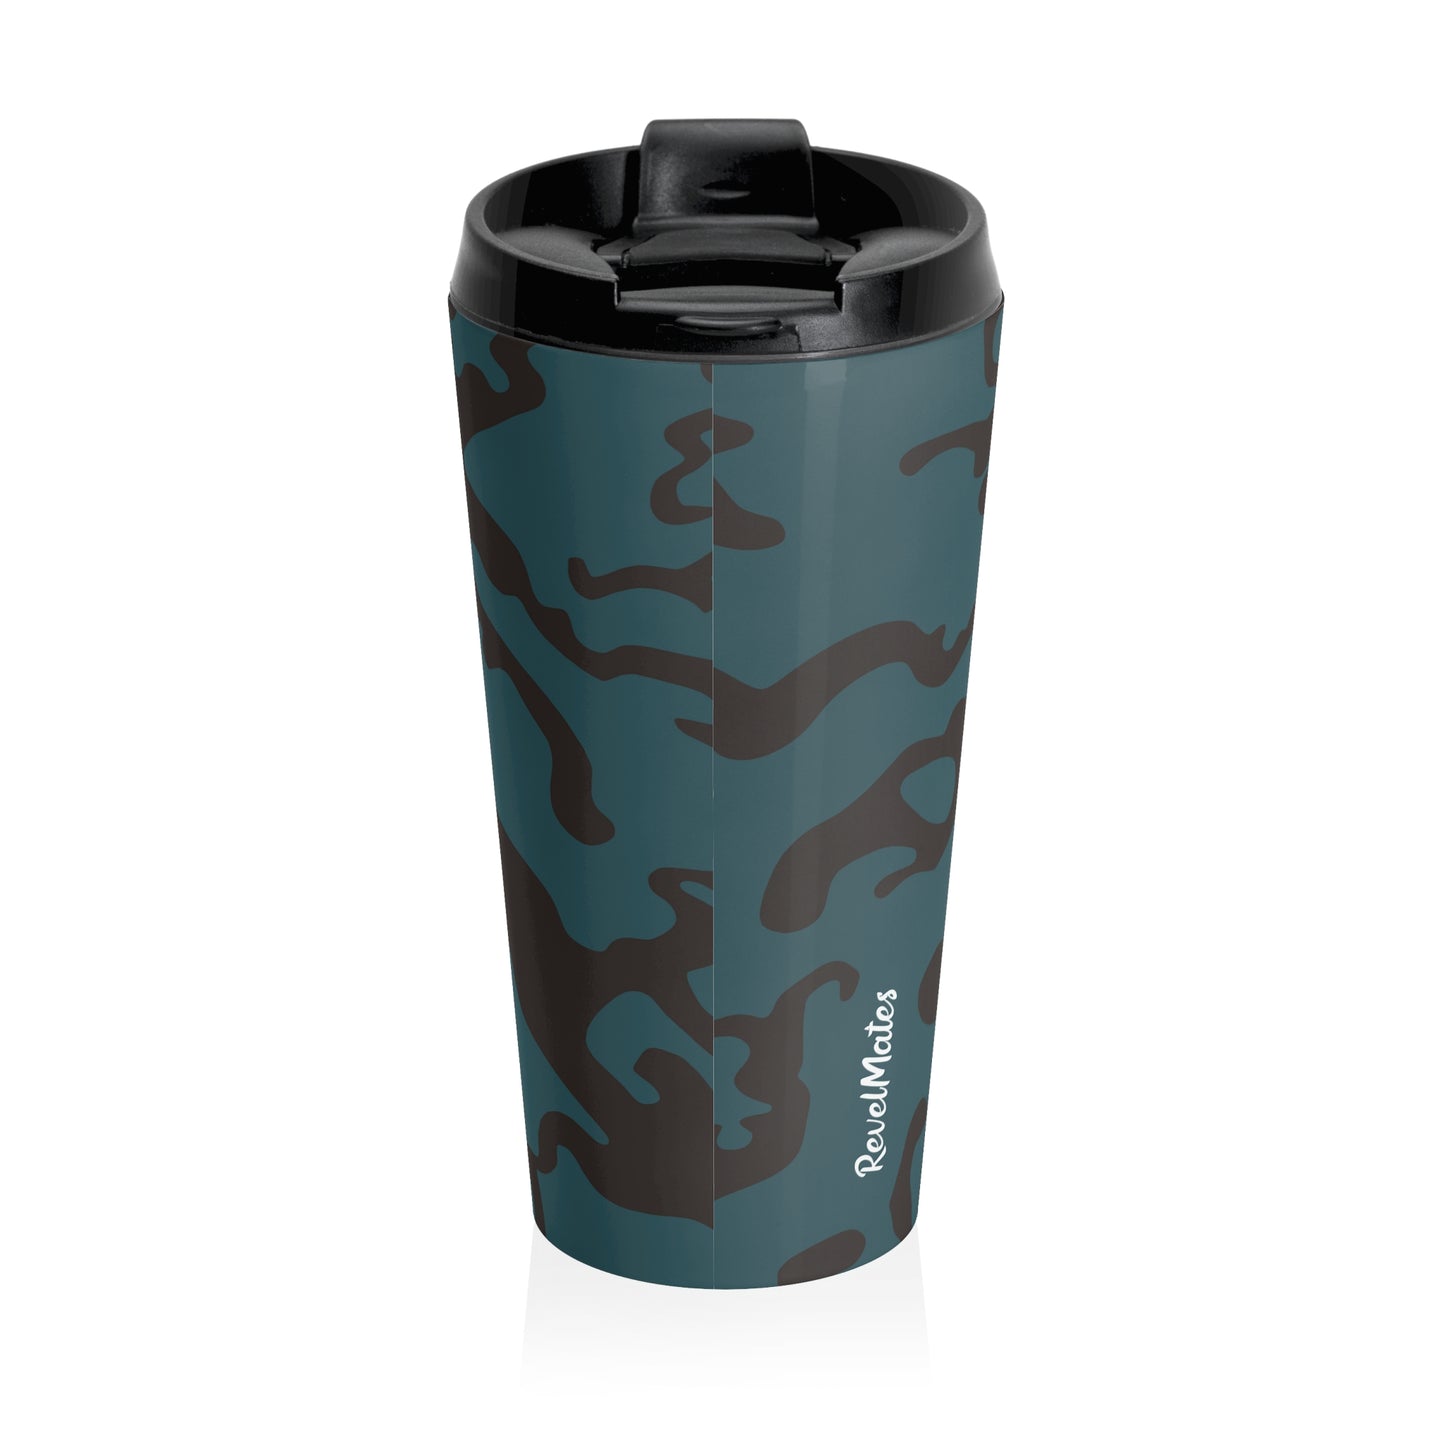 Stainless Steel Travel Mug With Cup 15oz (440ml) | Camouflage Turquoise & Brown Design